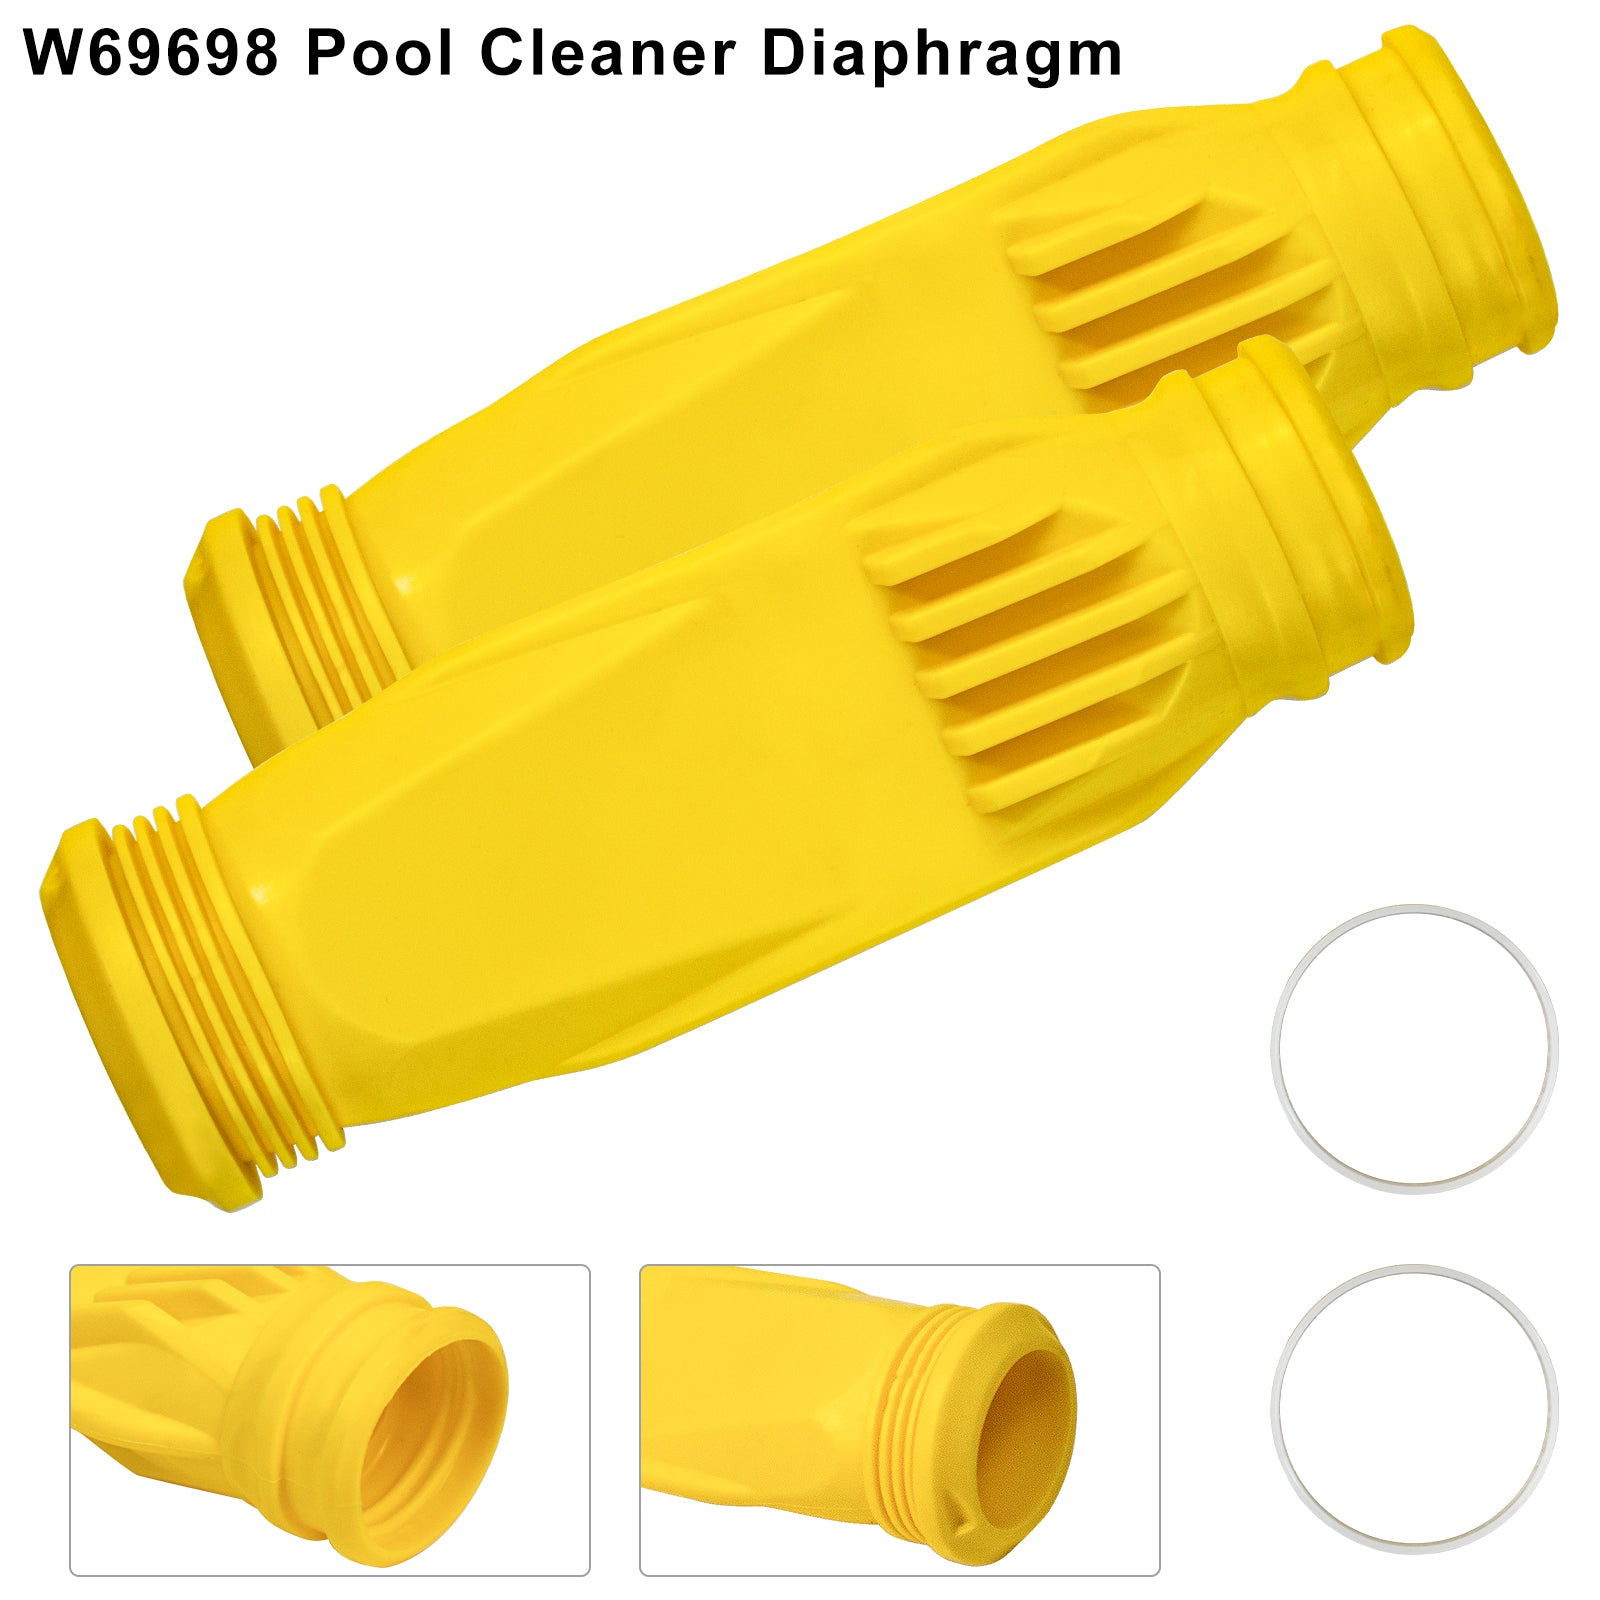 S-Union W70329 Finned Seal/Disc/Skirt & W69698 Pool Cleaner Diaphragm & W70327 Foot Pad Pool Cleaner Replacement Parts for Zodiac Baracuda G2, G3, G4, Alpha 2, 3